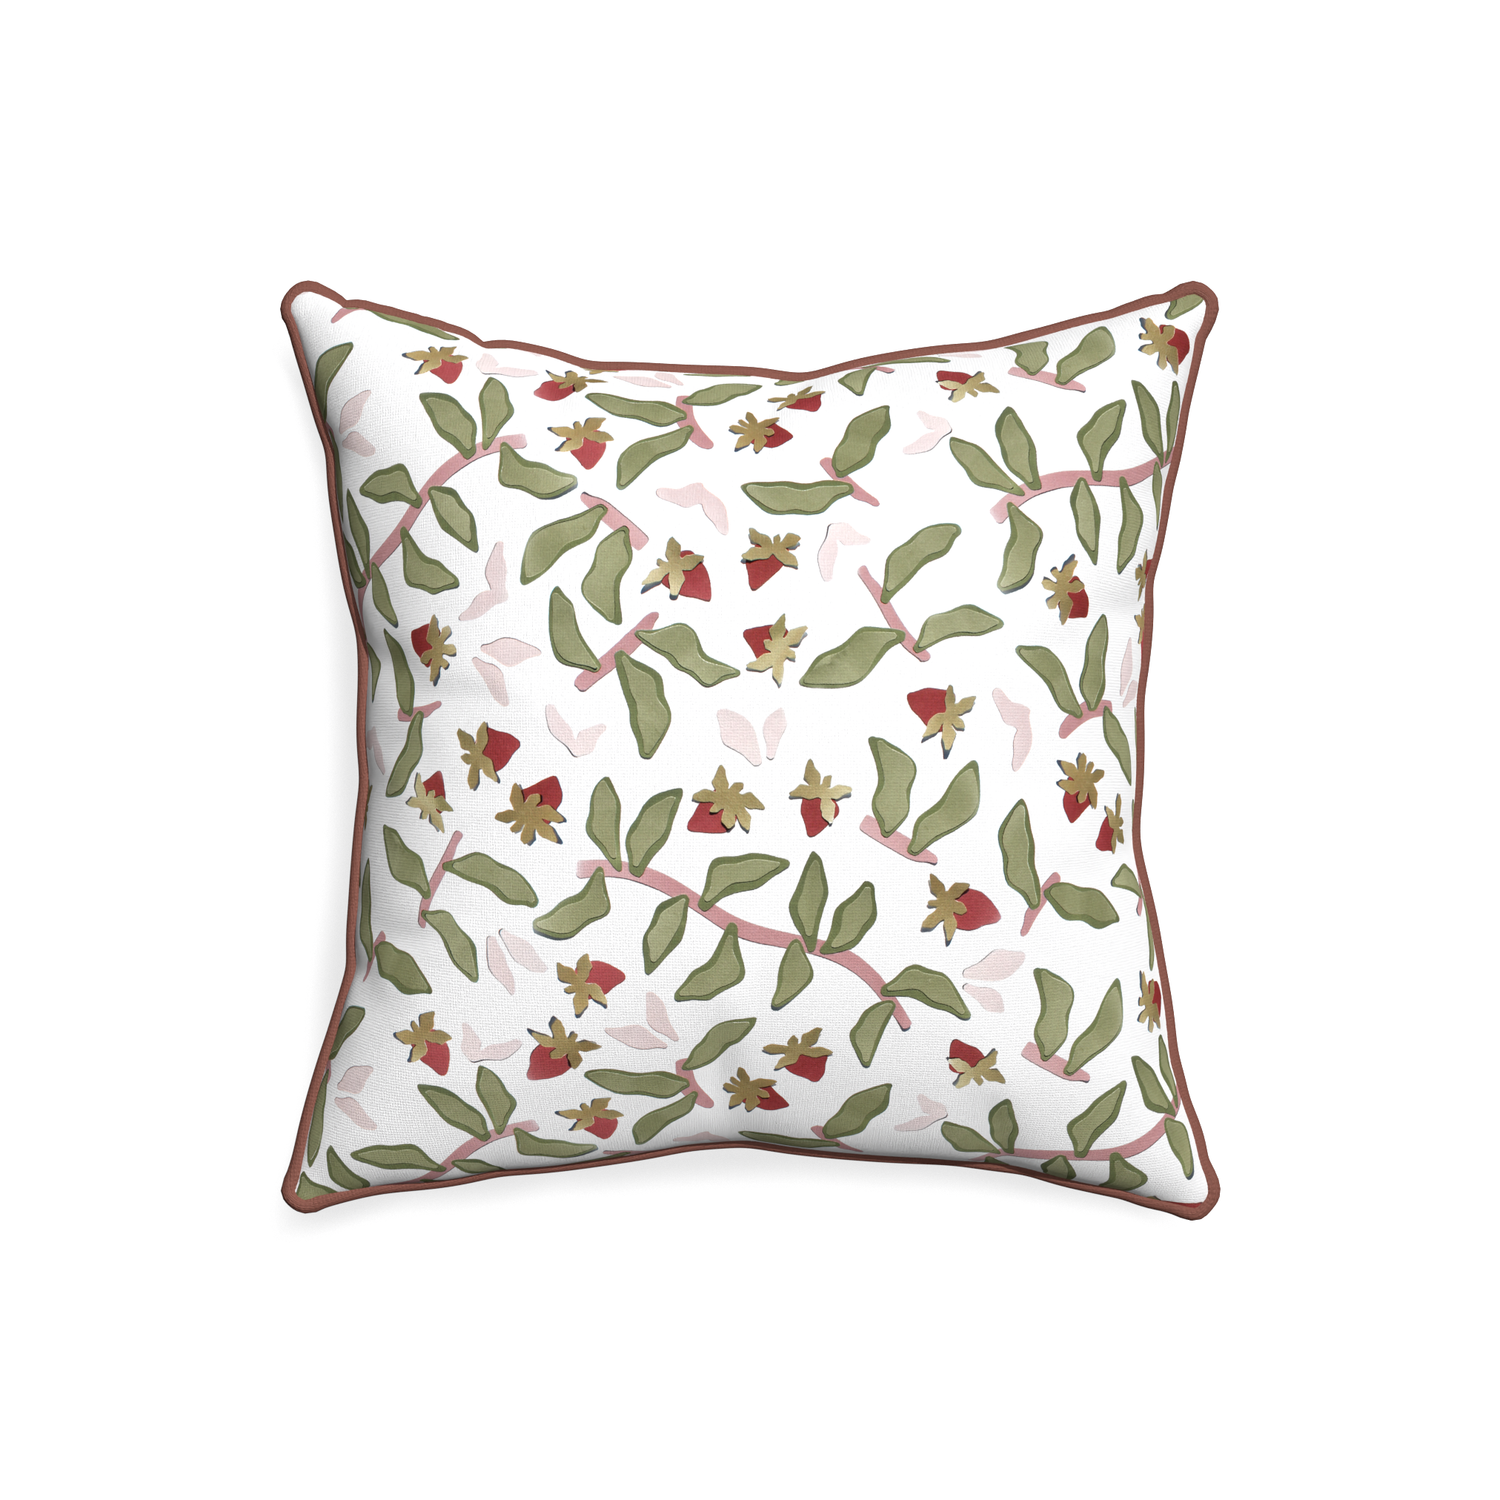 20-square nellie custom strawberry & botanicalpillow with w piping on white background